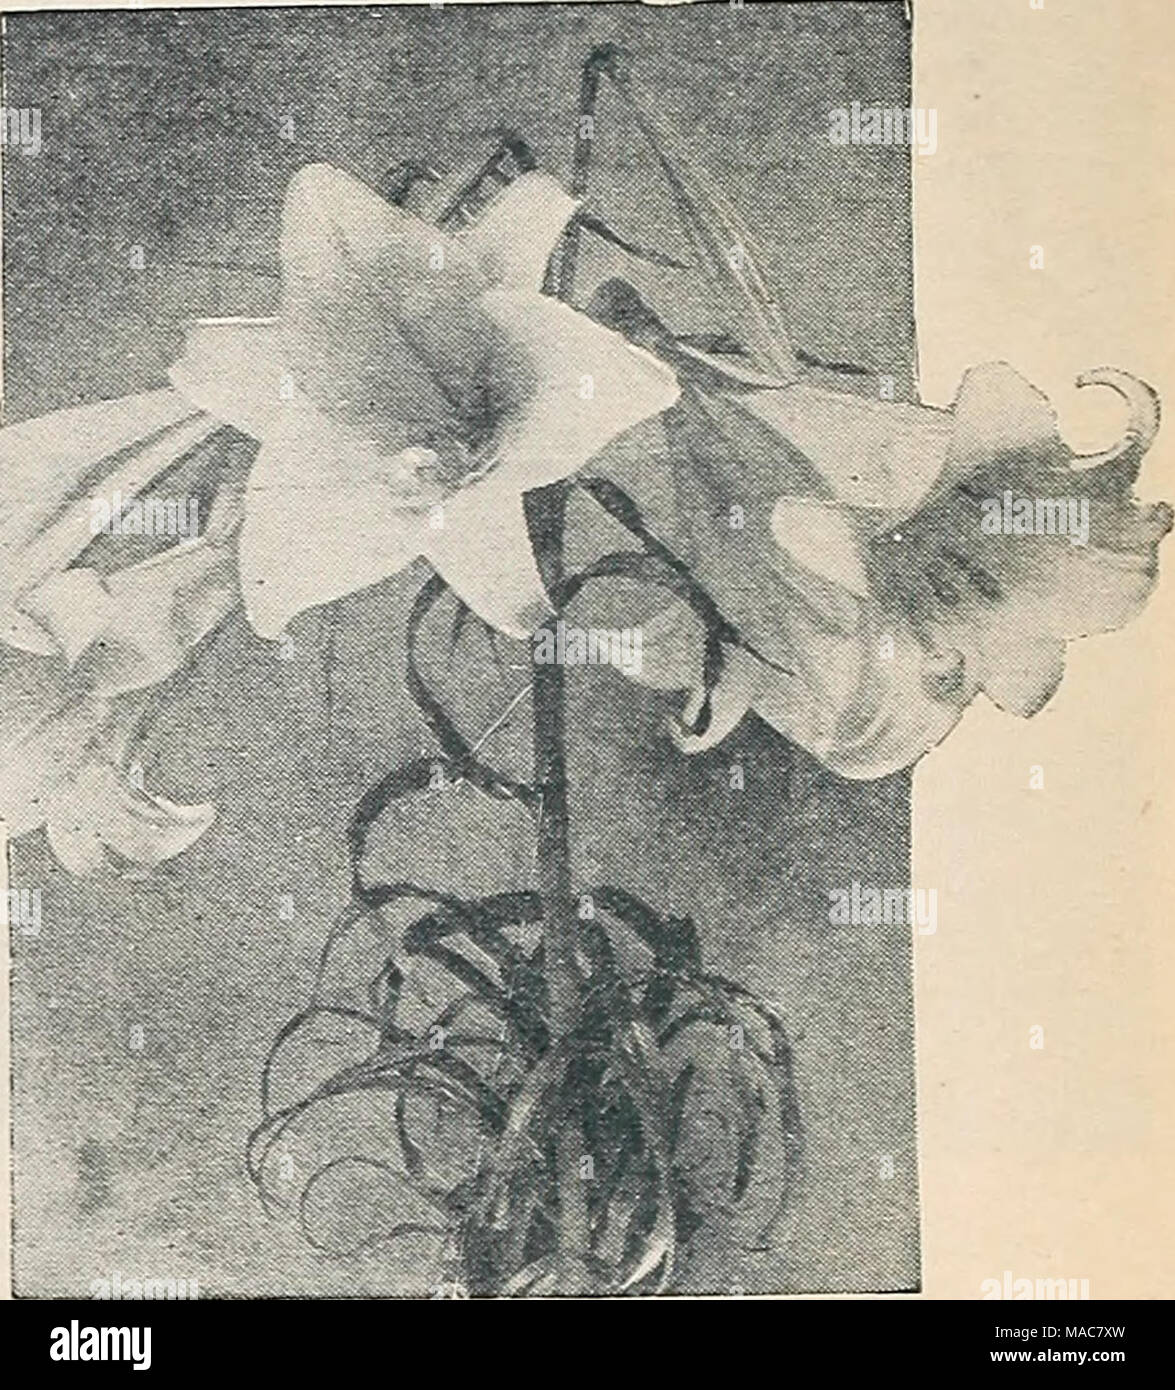 . Dreer's novelties and specialties 1934 . Lilium philippinense formosanum Lilium—Hardy Lilies 2987 Philippinense formosanum. A truly remarkable Lily with umbels of large, white, long trumpet-shaped flowers, like an Easter Lily. The plants will bloom in 6 to 8 months from the time seeds are sown; very fragrant. 2 to 3 feet. Pkt. 25c; special pkt. 60c. 2988 Regale. One of the most beautiful of all hardy garden Lihes. Grows 3 to 5 feet high, blooms outdoors in July. Large, trumpet shaped flowers; color ivory-white, shaded pink and tinged with canary yellow at base of petals. Pkt 15c; } oz. 50c.  Stock Photo